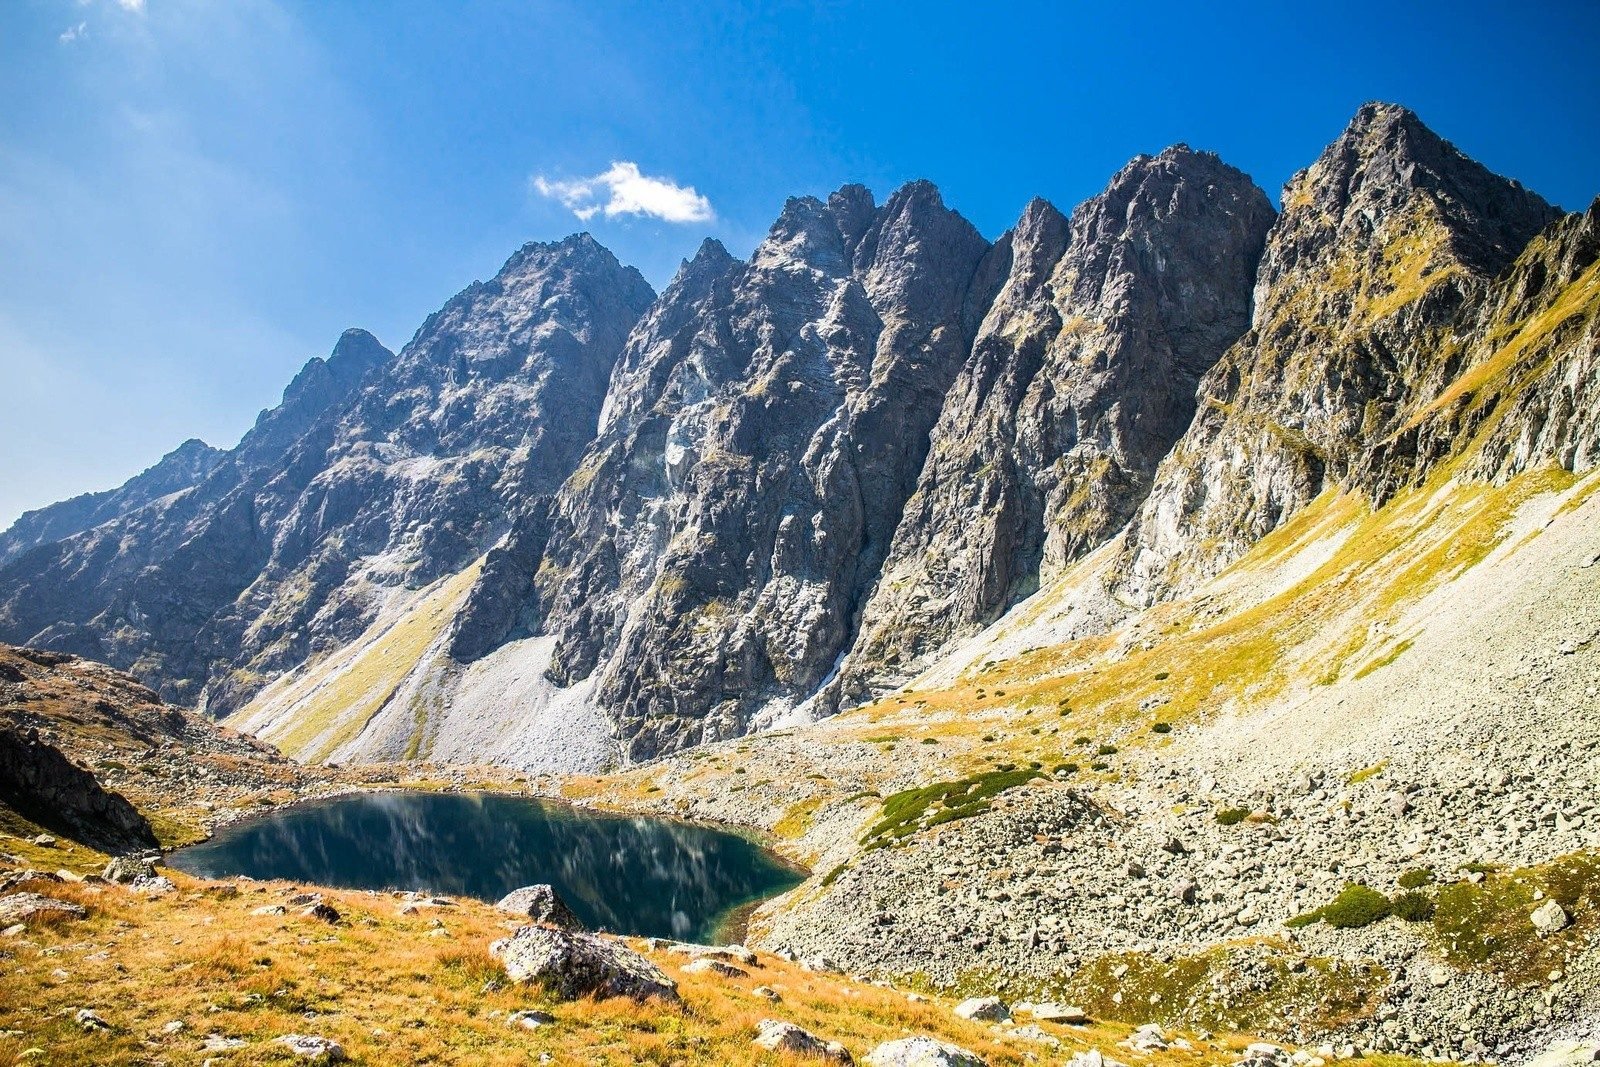 The Tatra Mountains can be found in Slovakia, and are the highest range in the whole of the Carpathians.